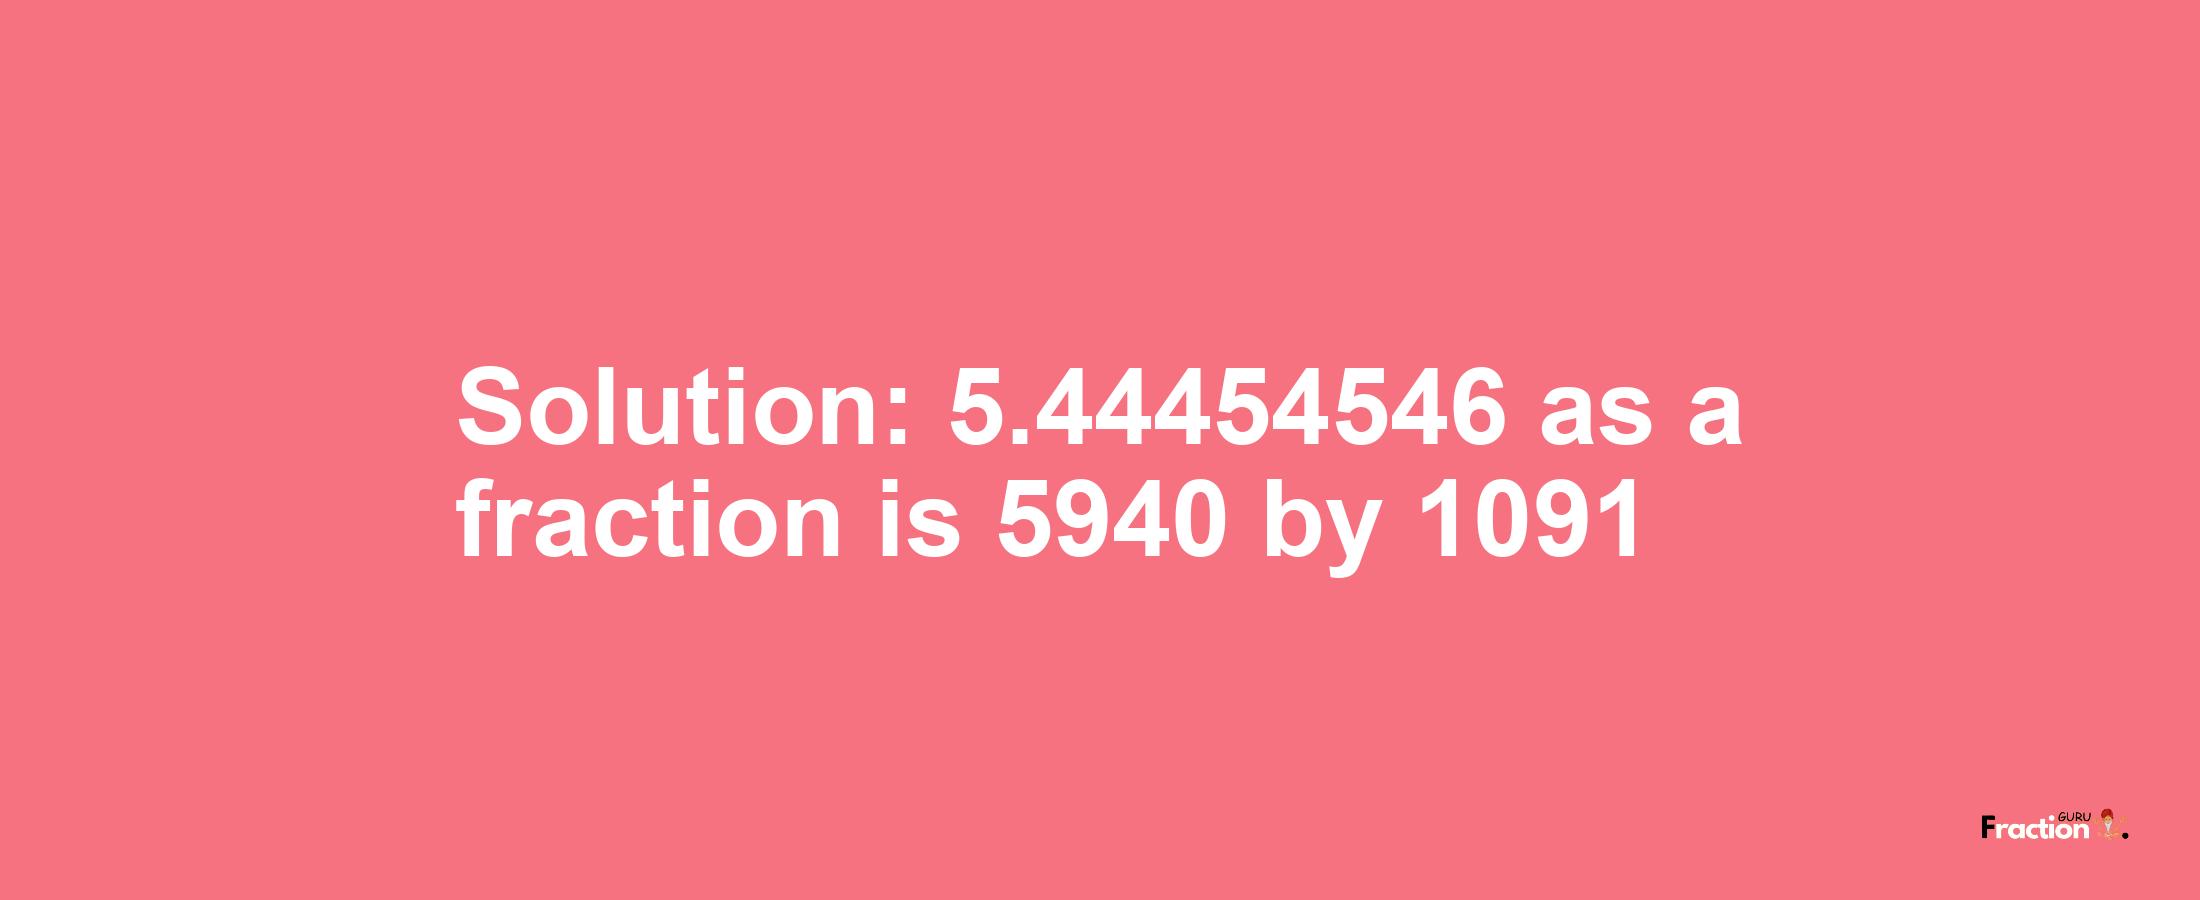 Solution:5.44454546 as a fraction is 5940/1091